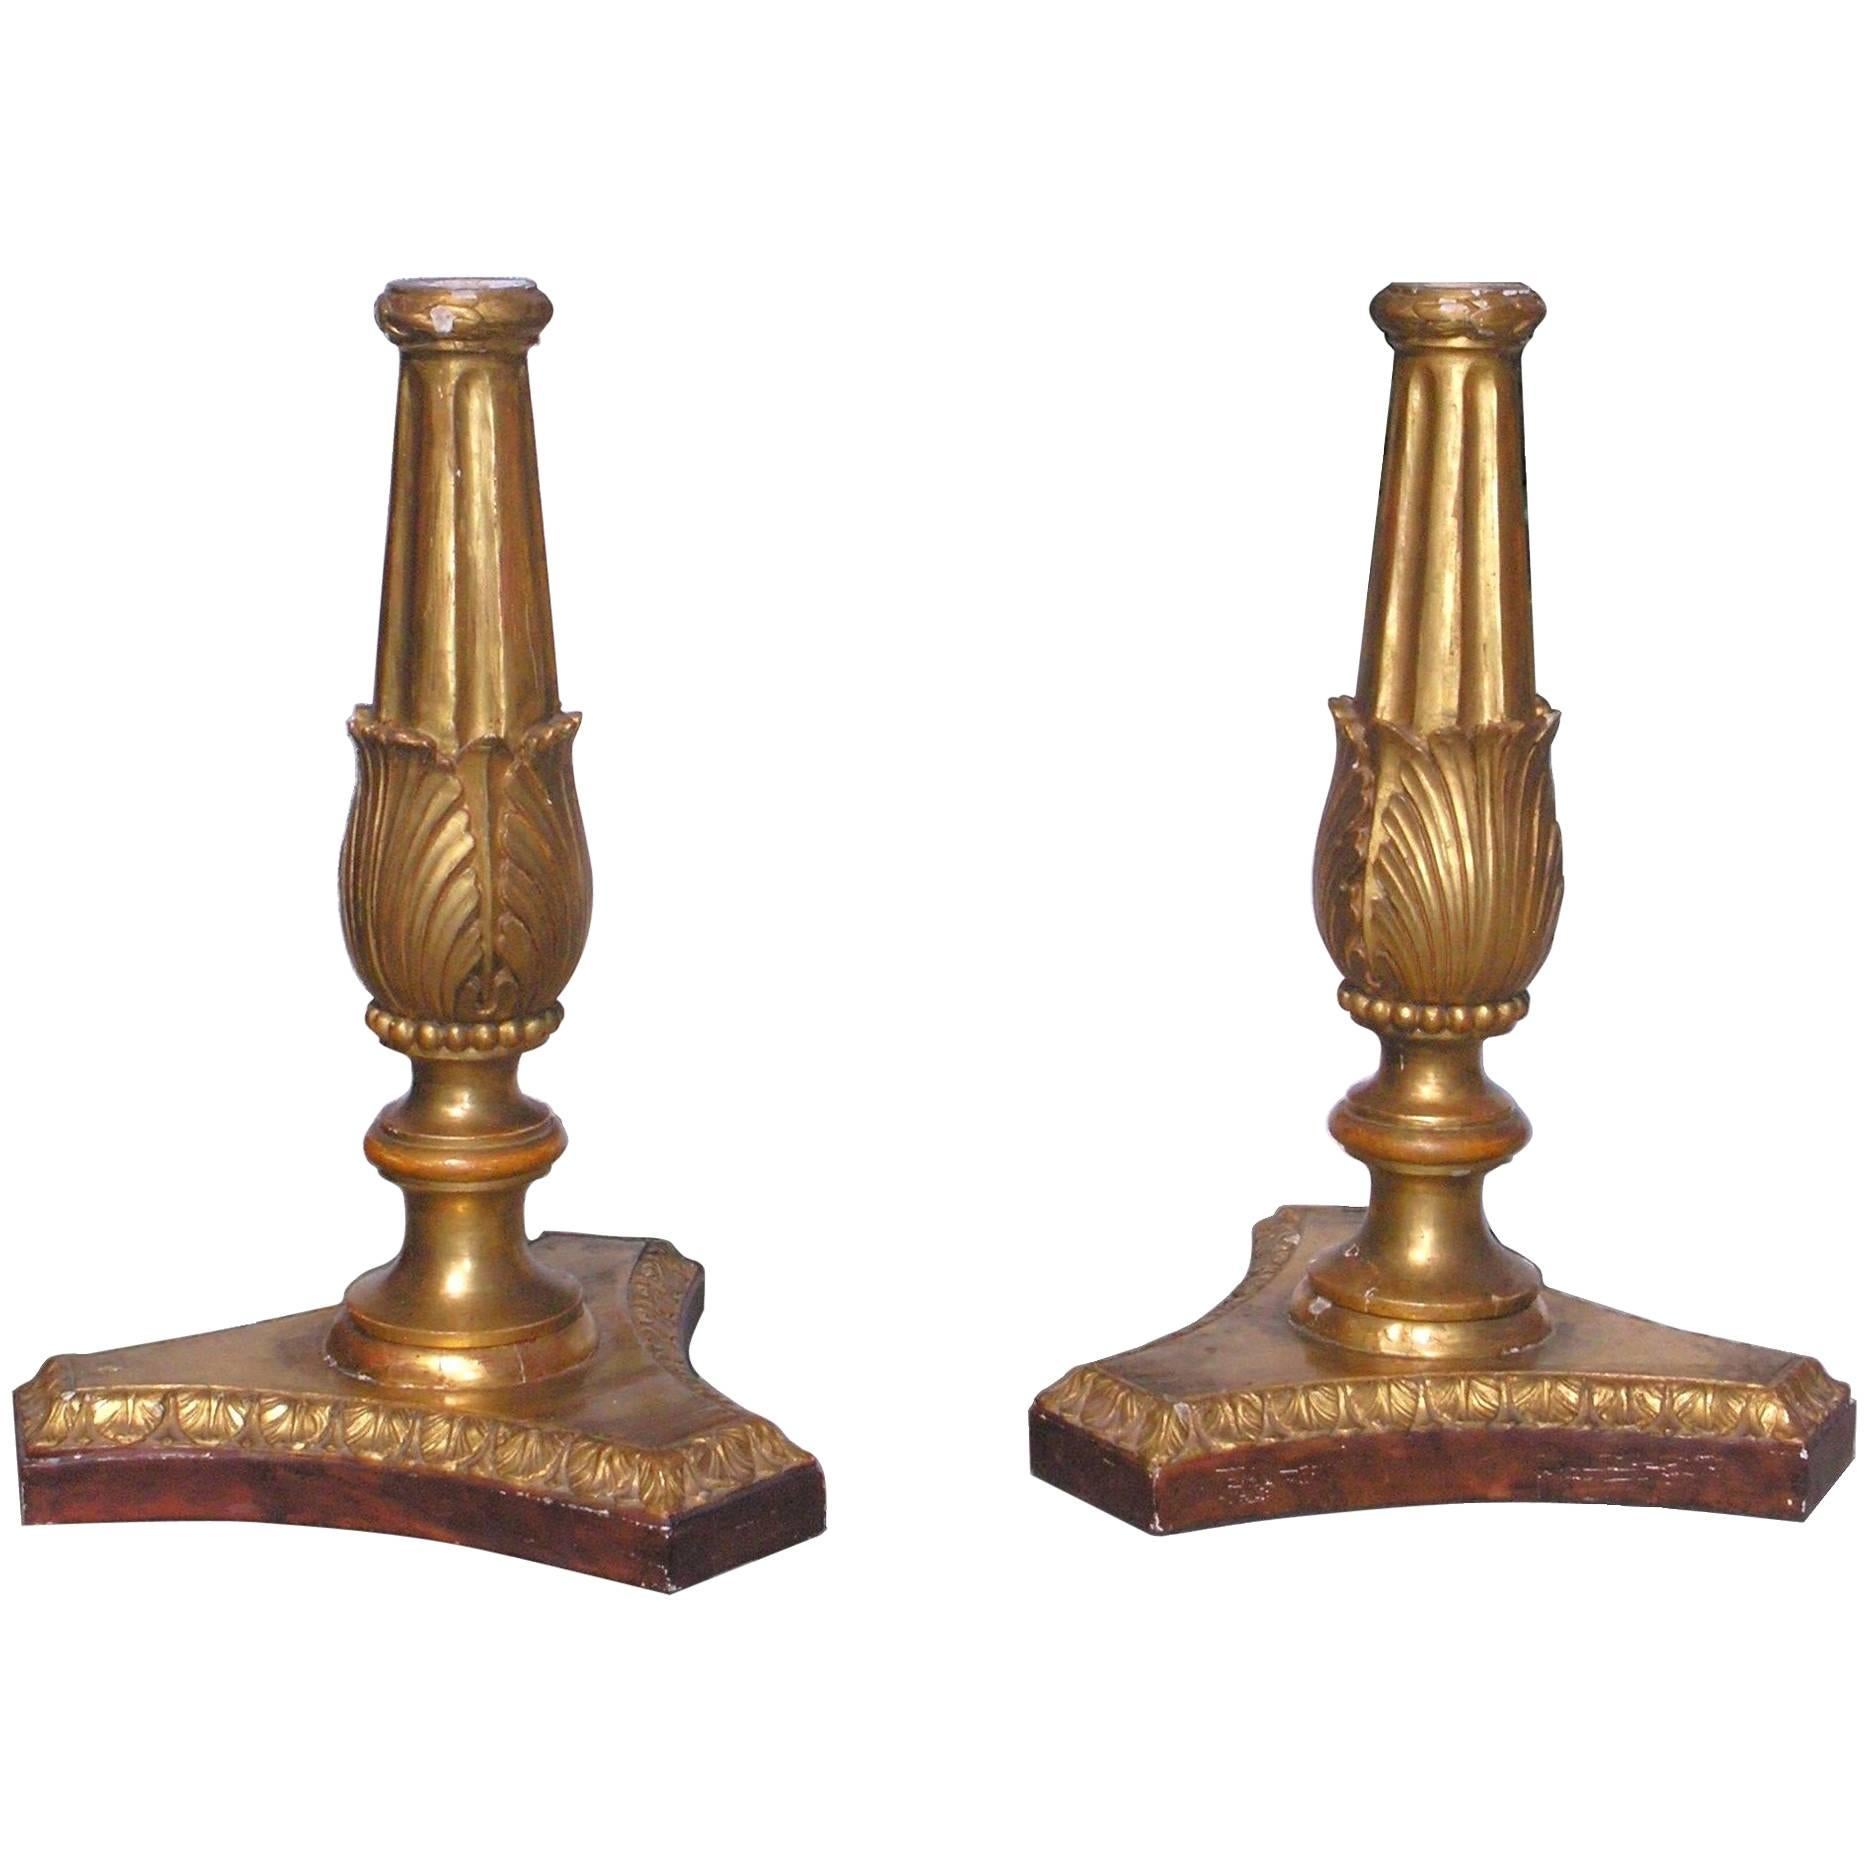 Pair of 18th Century Italian Neoclassical Giltwood Candleholders For Sale